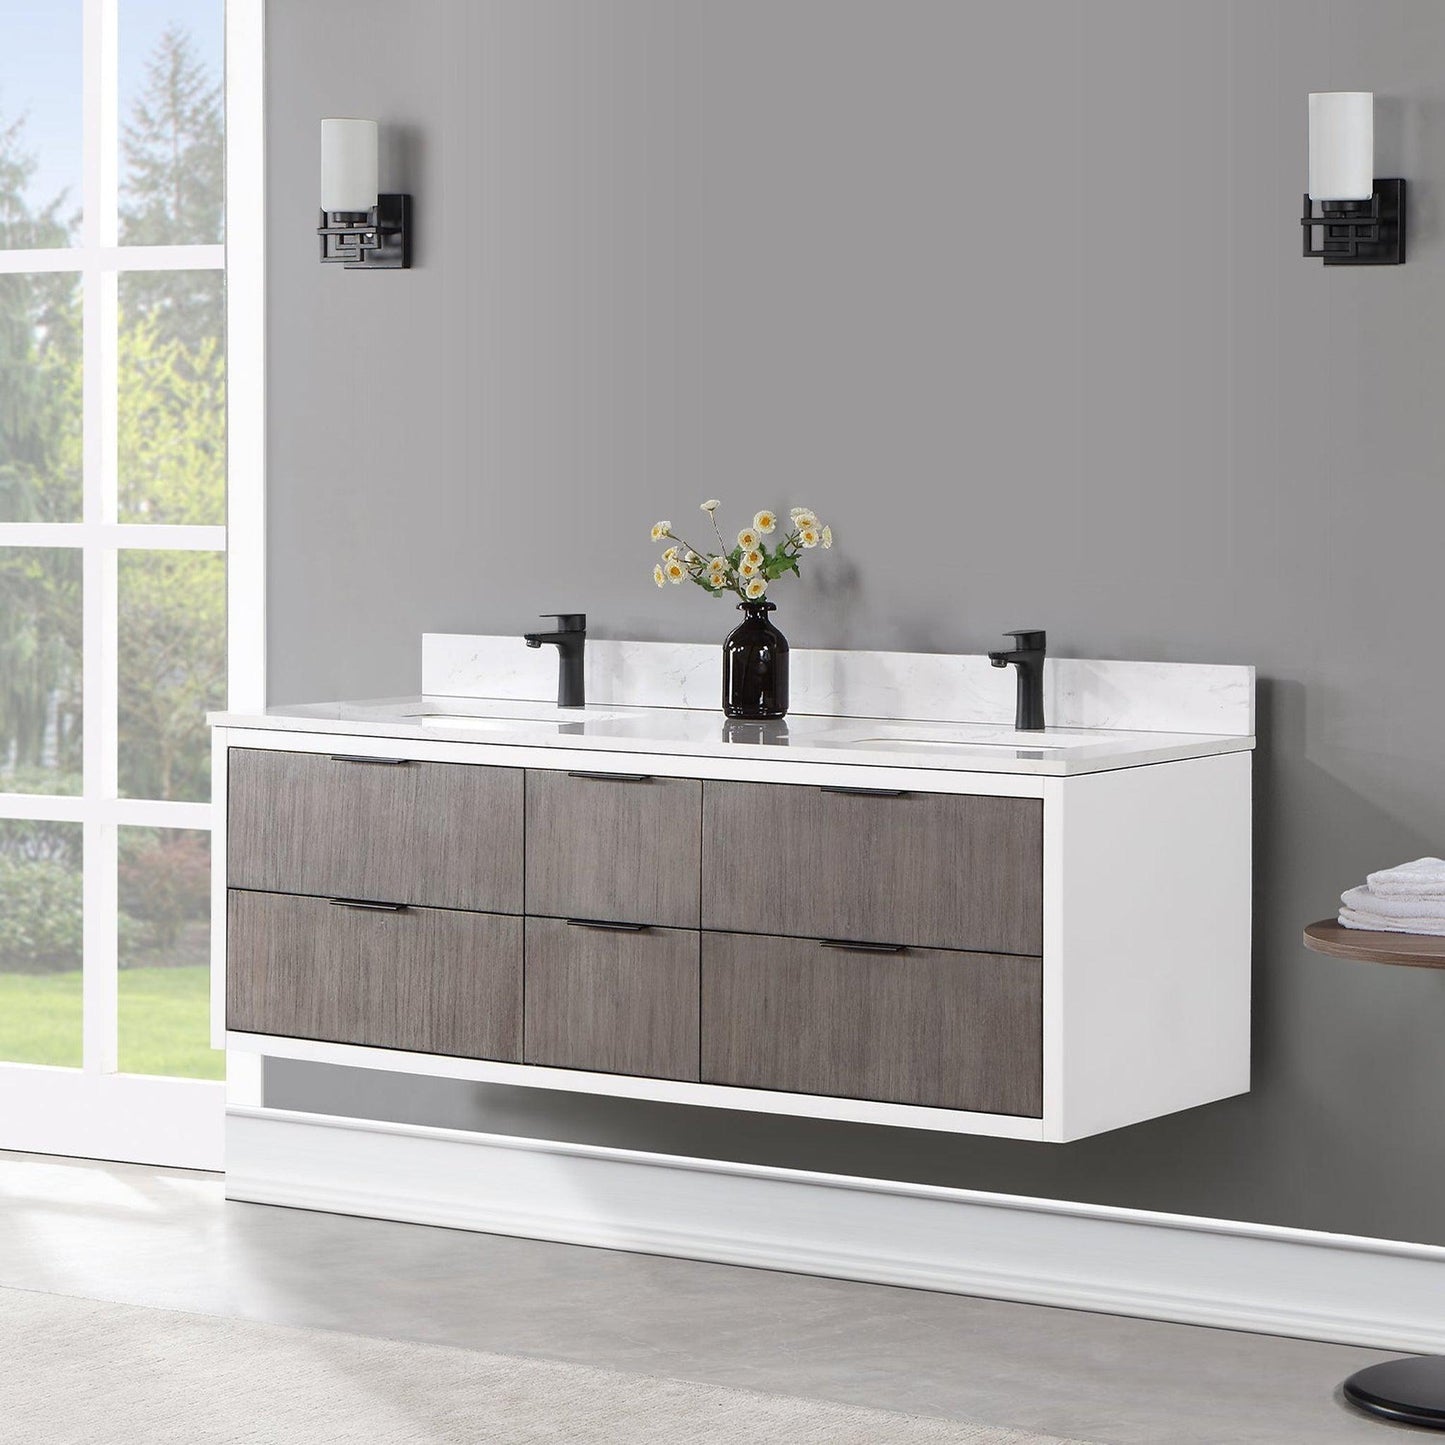 Altair Dione 60" Double Classical Gray Wall-Mounted Bathroom Vanity Set With Aosta White Composite Stone Top, Double Rectangular Undermount Ceramic Sinks, Overflow, and Backsplash